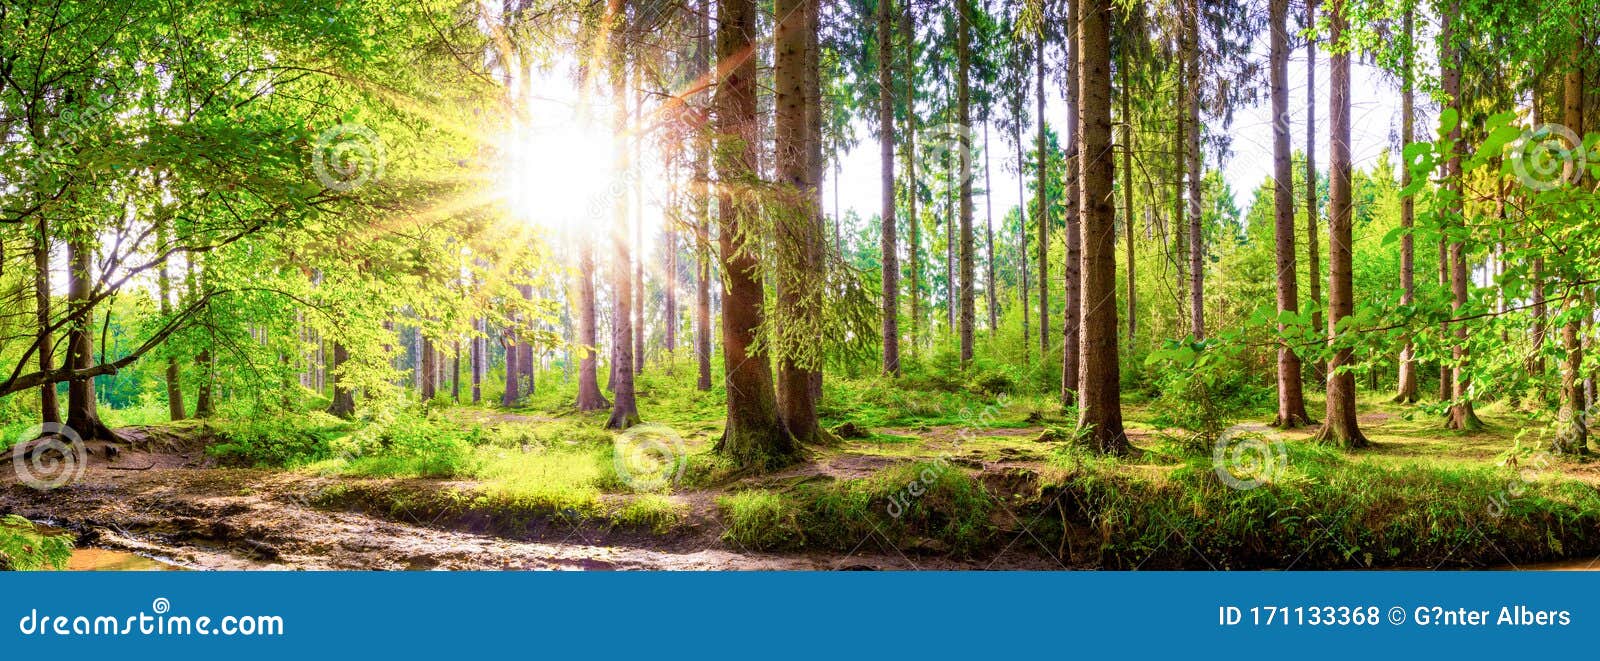 Forest With Bright Sun Shining Through The Trees Stock Photo Image Of